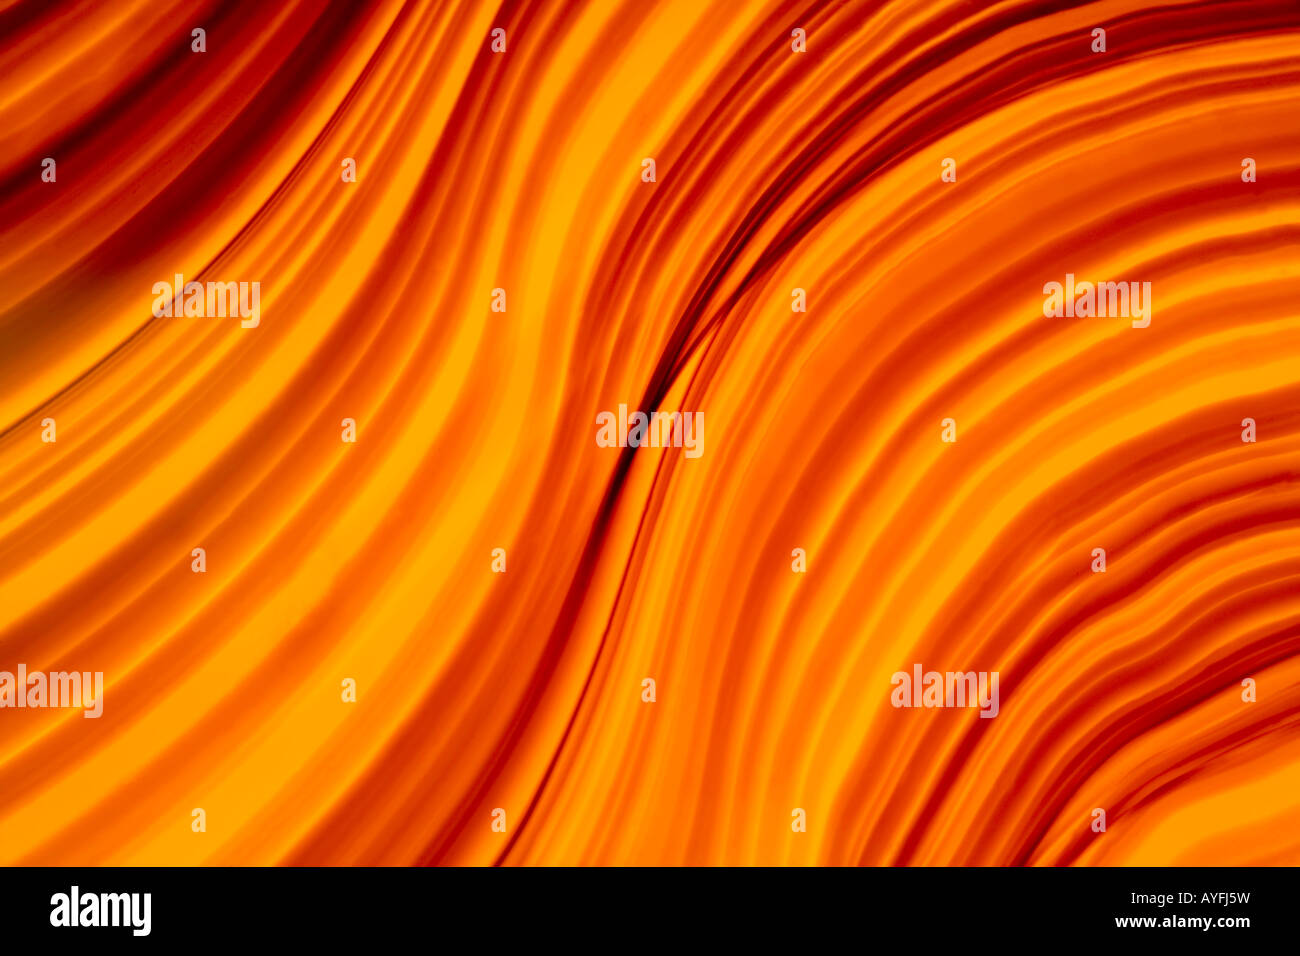 Glass abstract that looks like flowing hot lava. Stock Photo